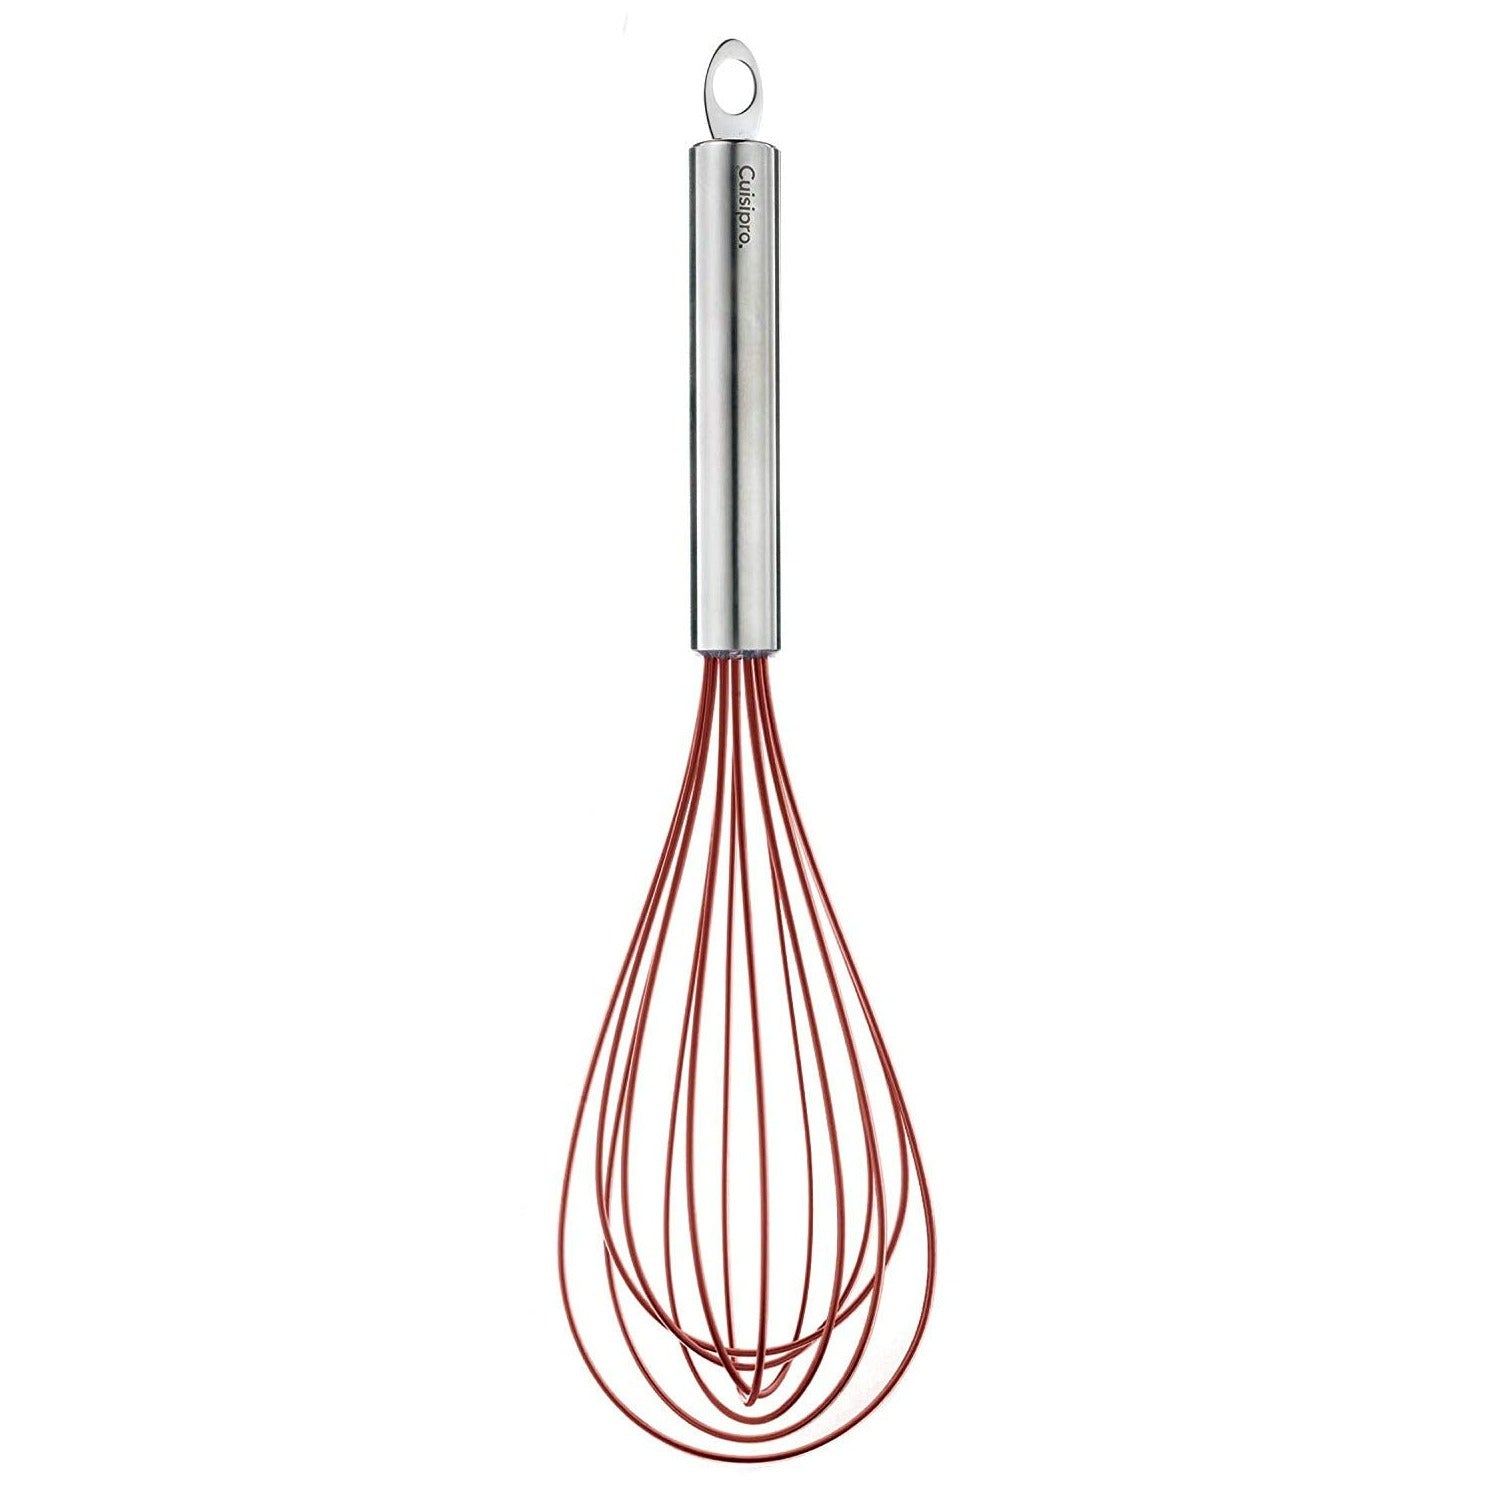 Cuisipro 10 Balloon Whisk - Stainless Steel